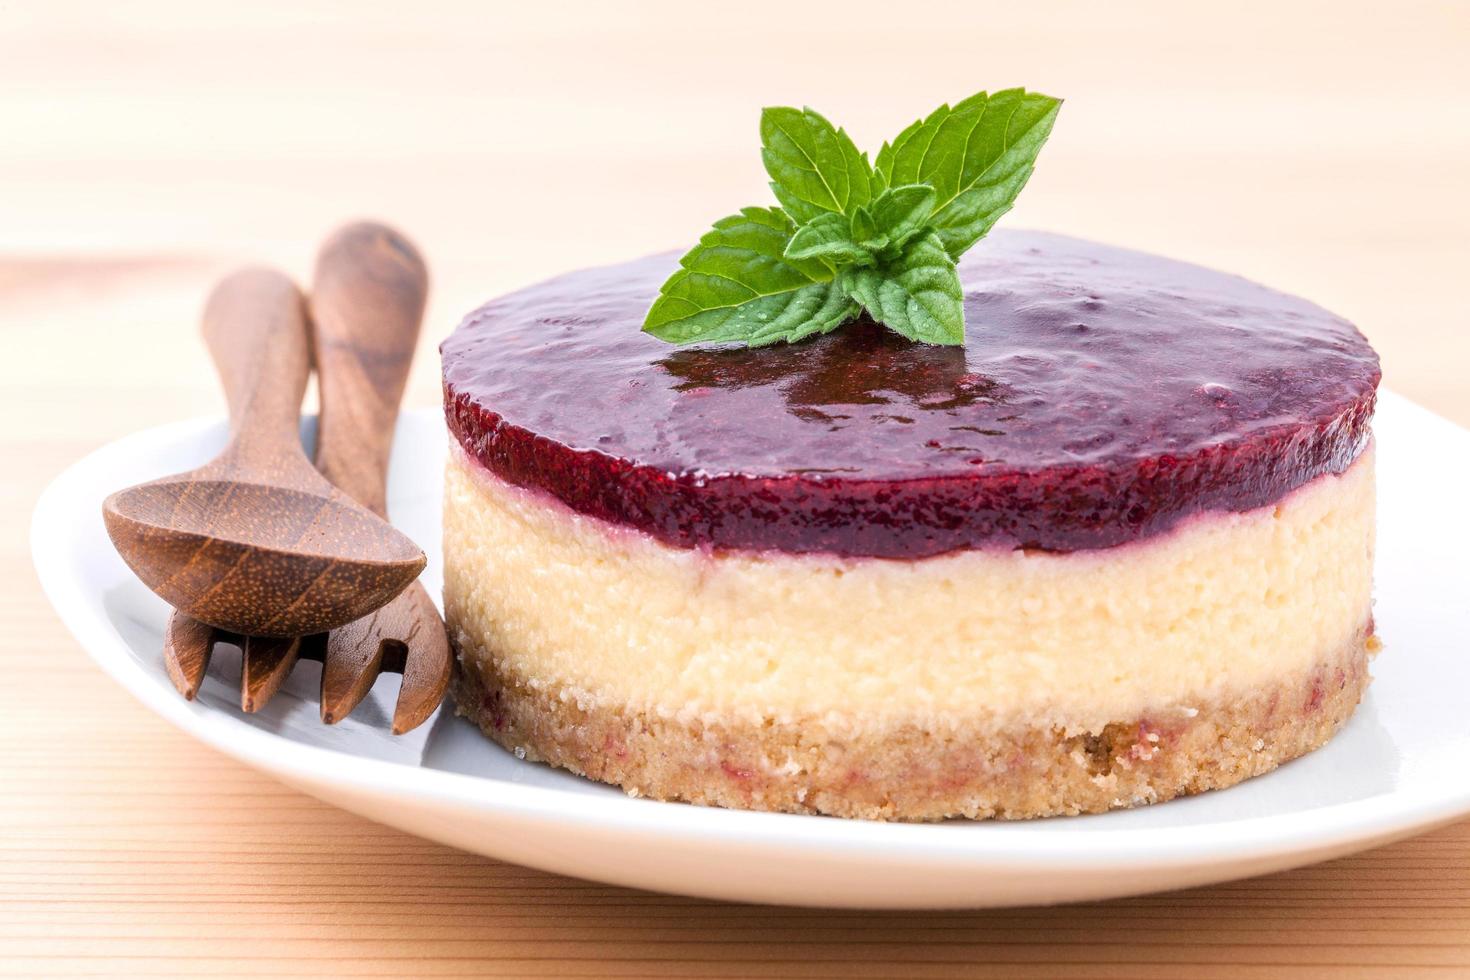 Blueberry cheesecake with wooden utensils photo